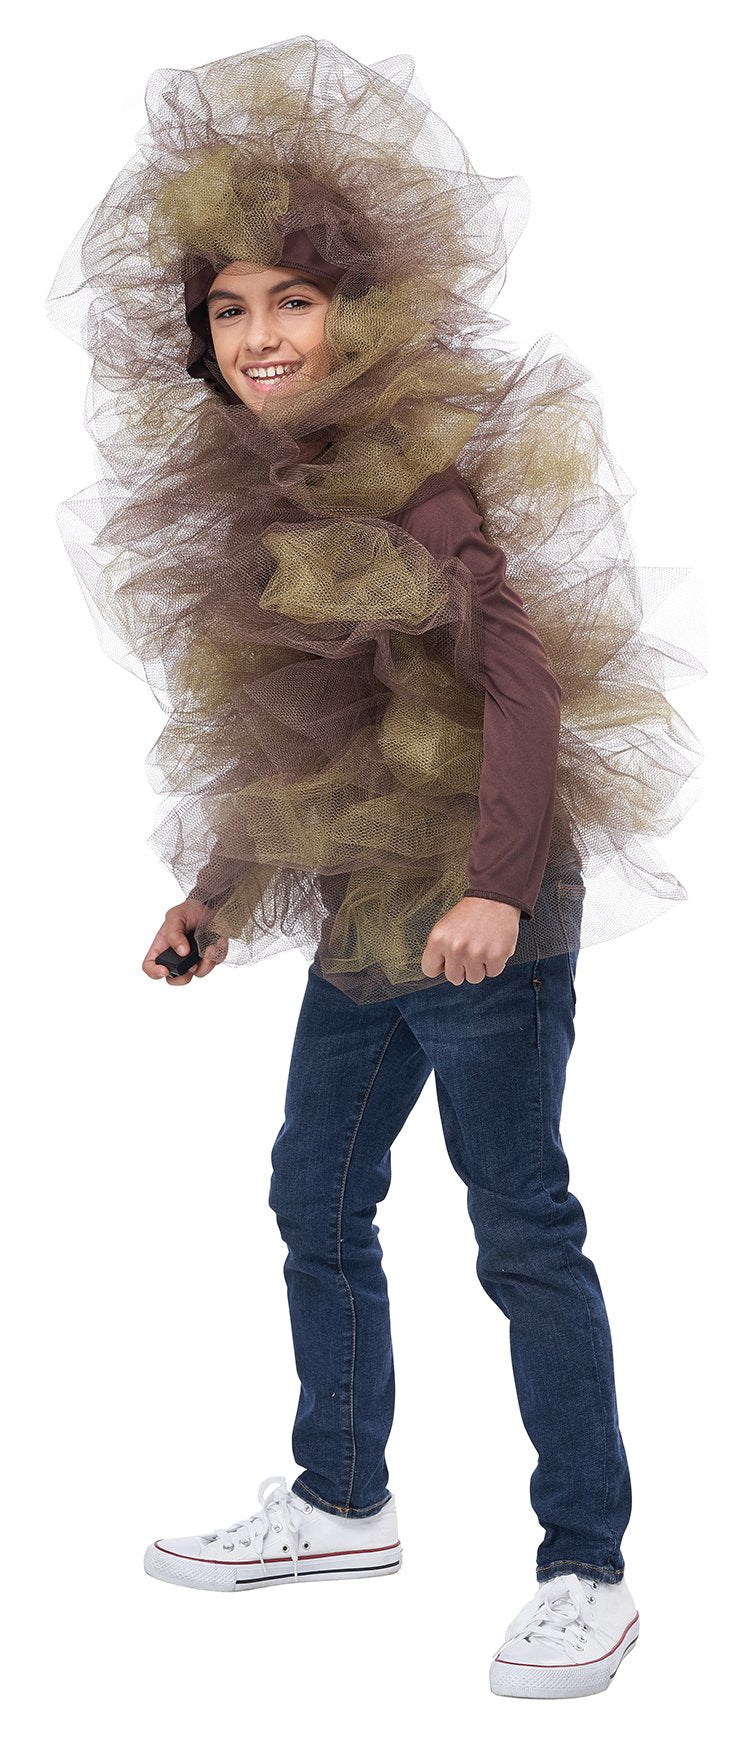 Netted Fart Costume with sound